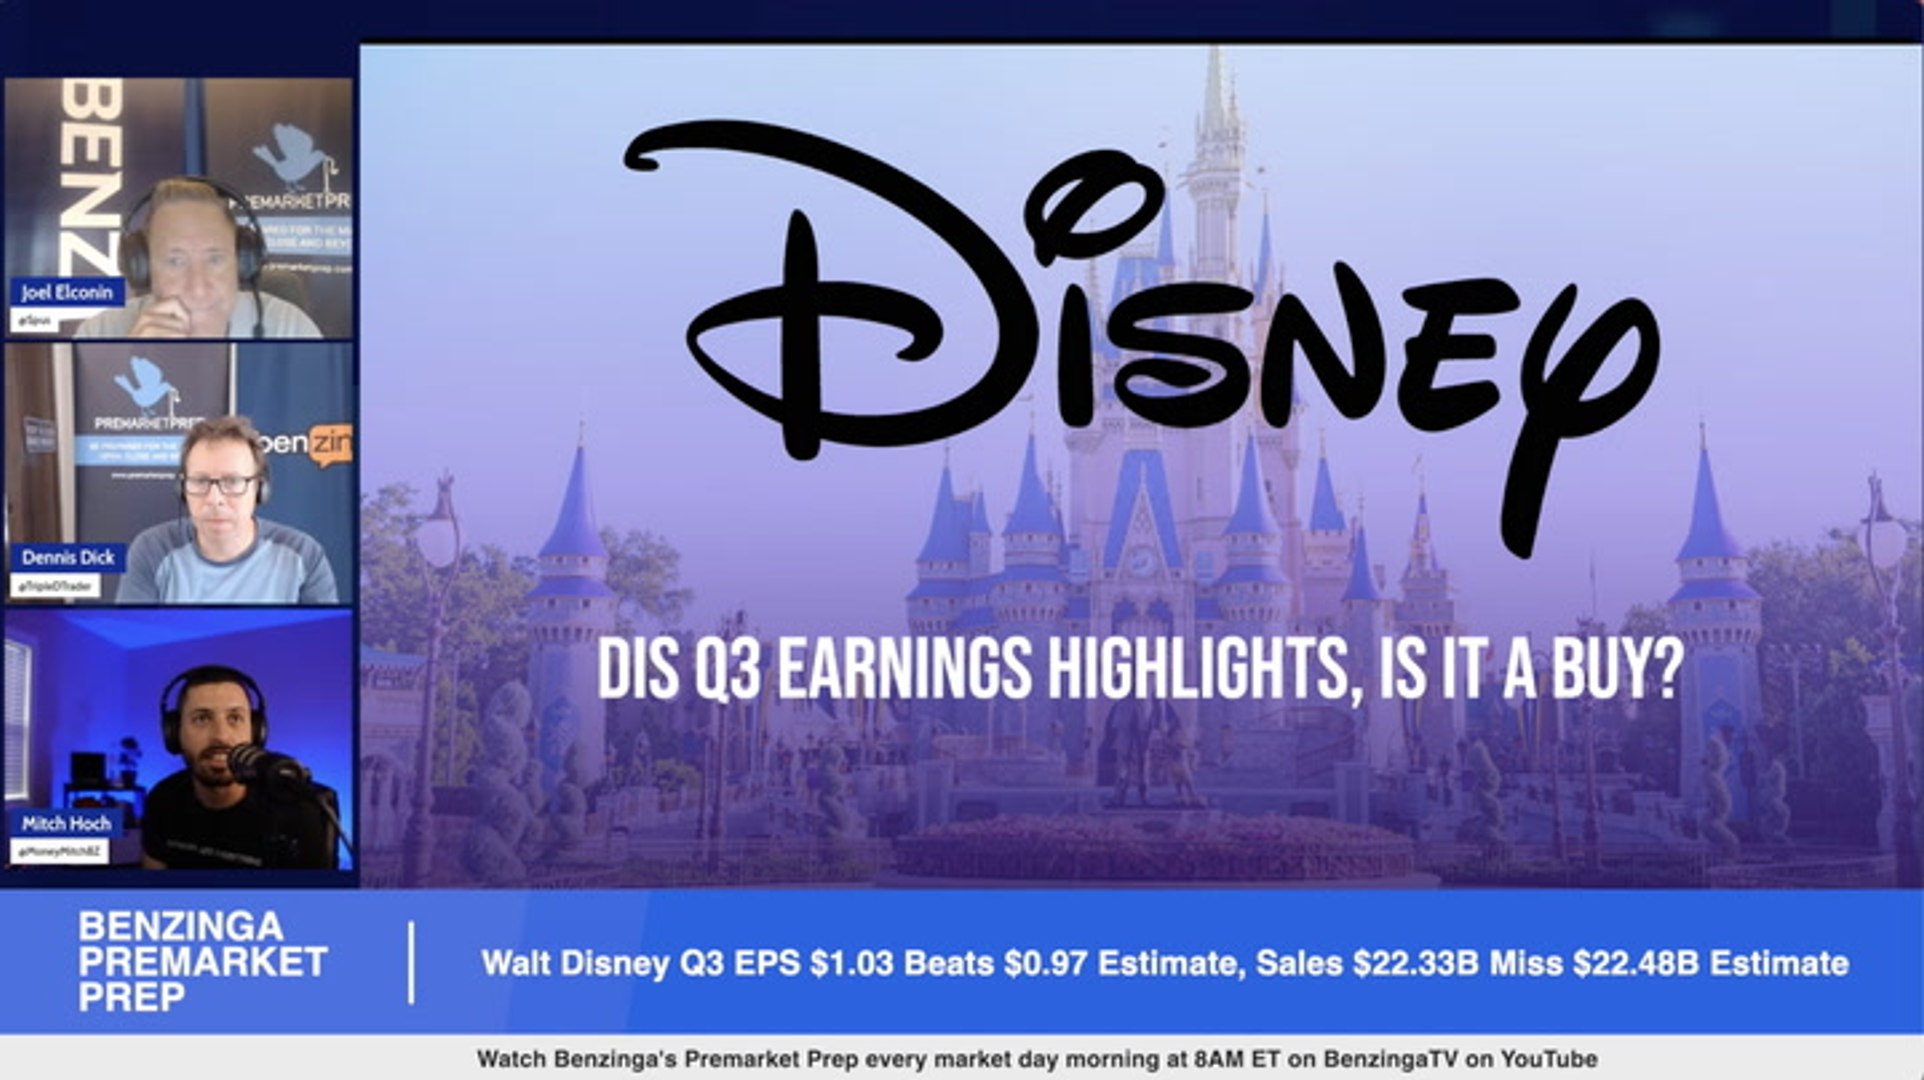 Disney Q3 Earnings Highlights: Is The Stock A Buy? - video Dailymotion